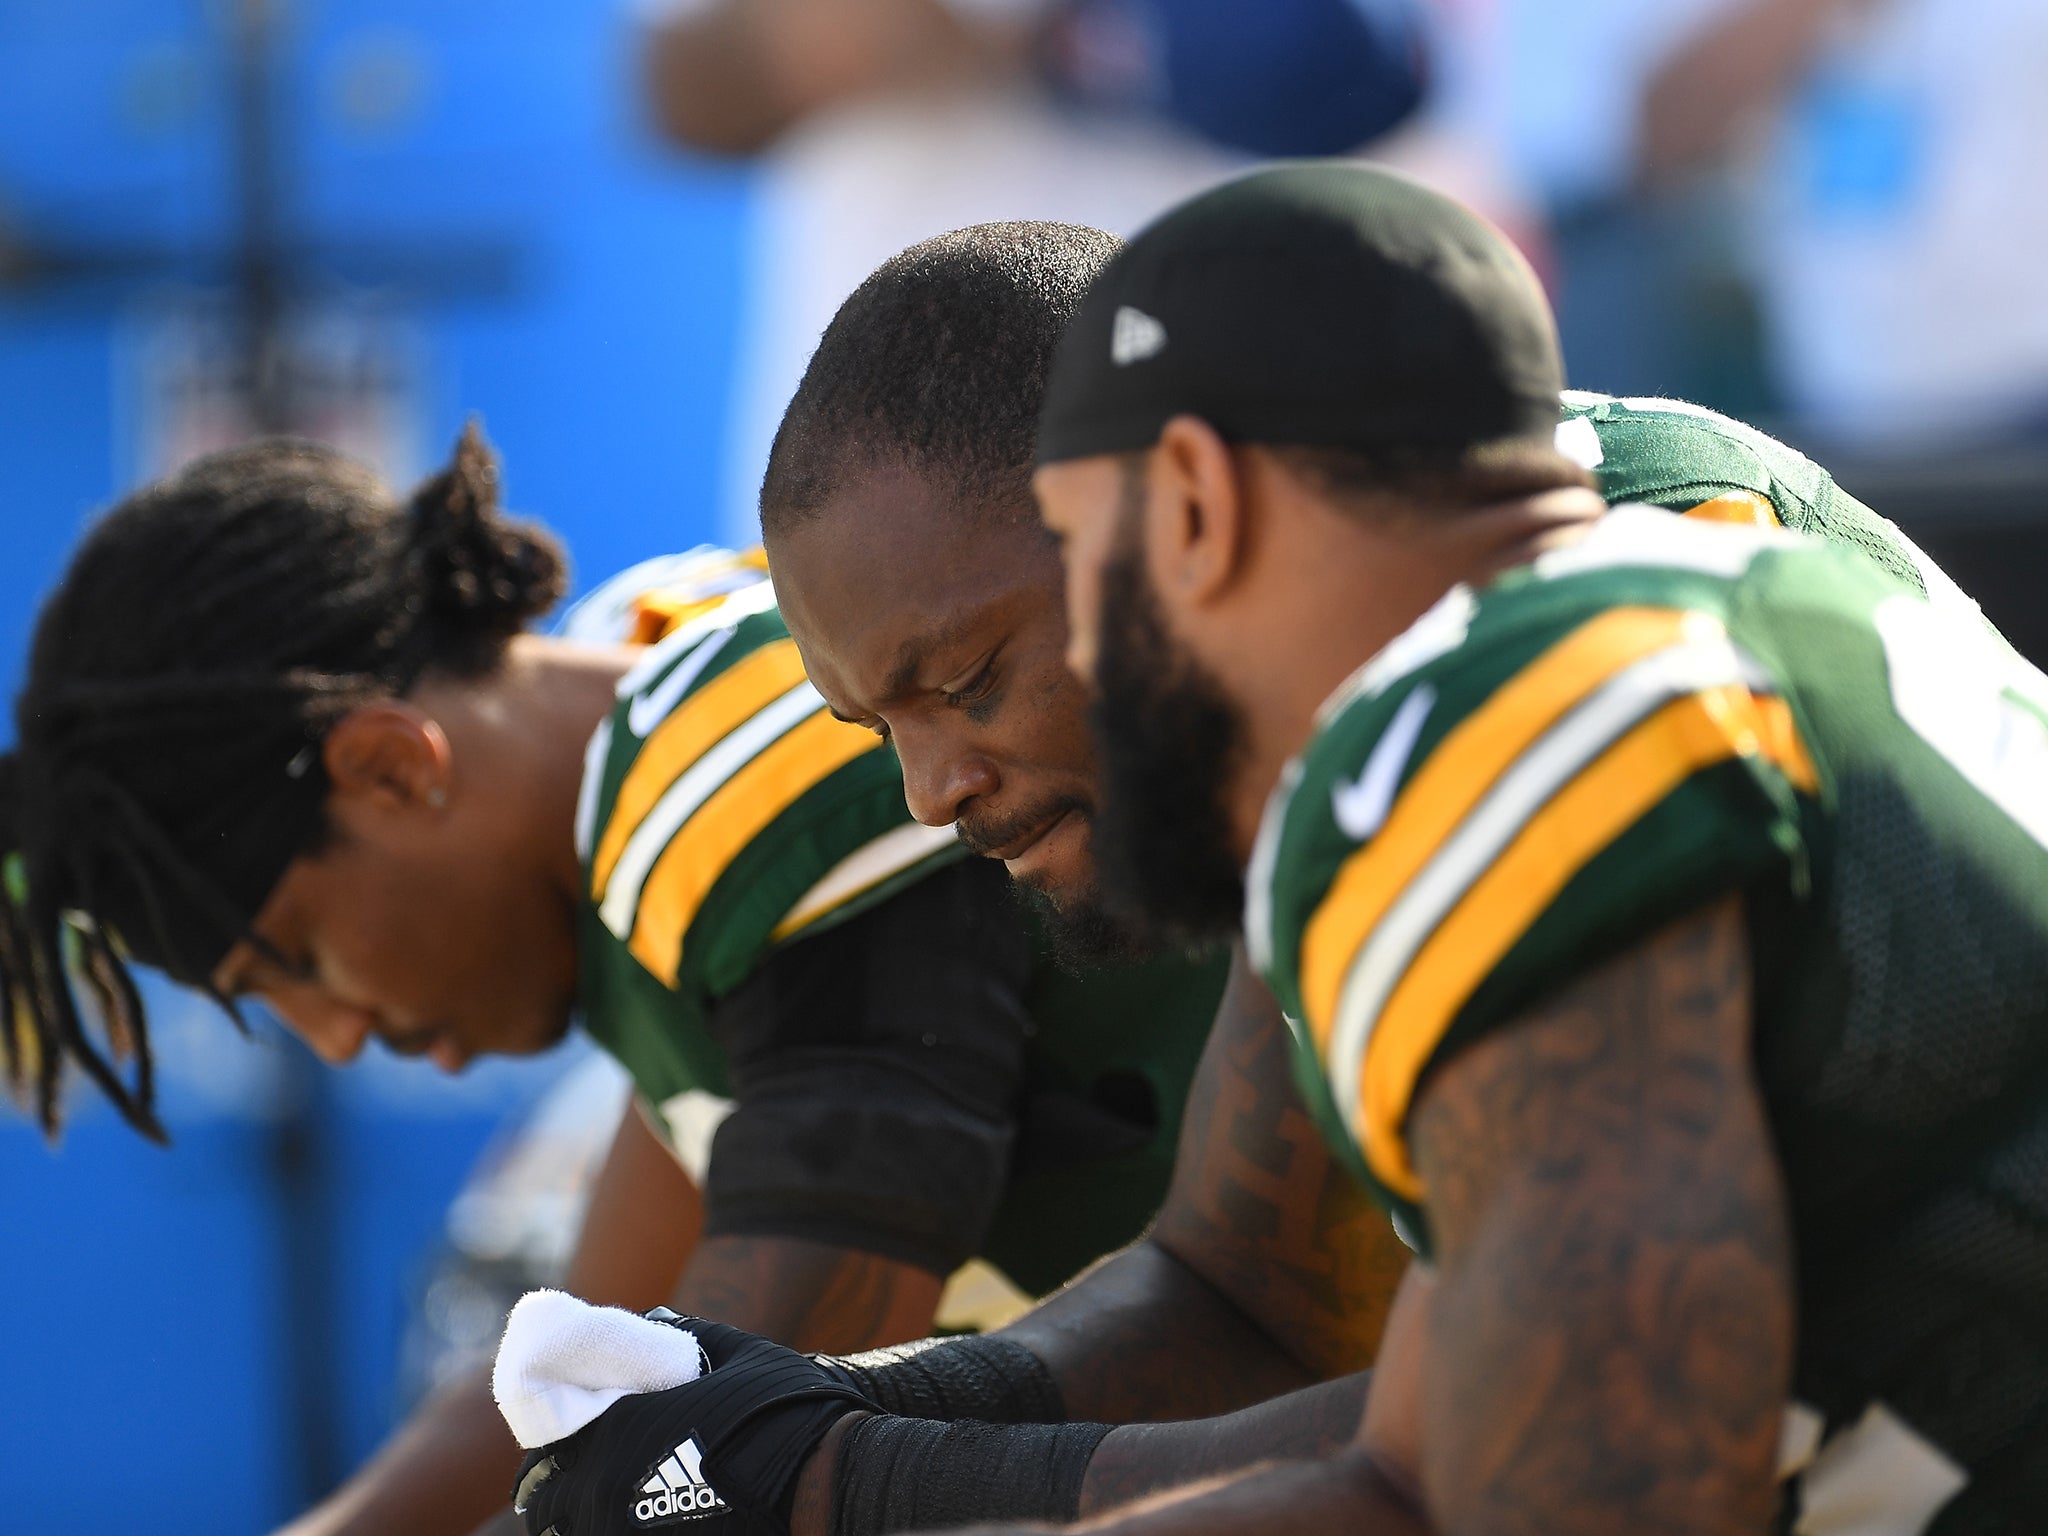 Green Bay Packers players sat down during the national anthem